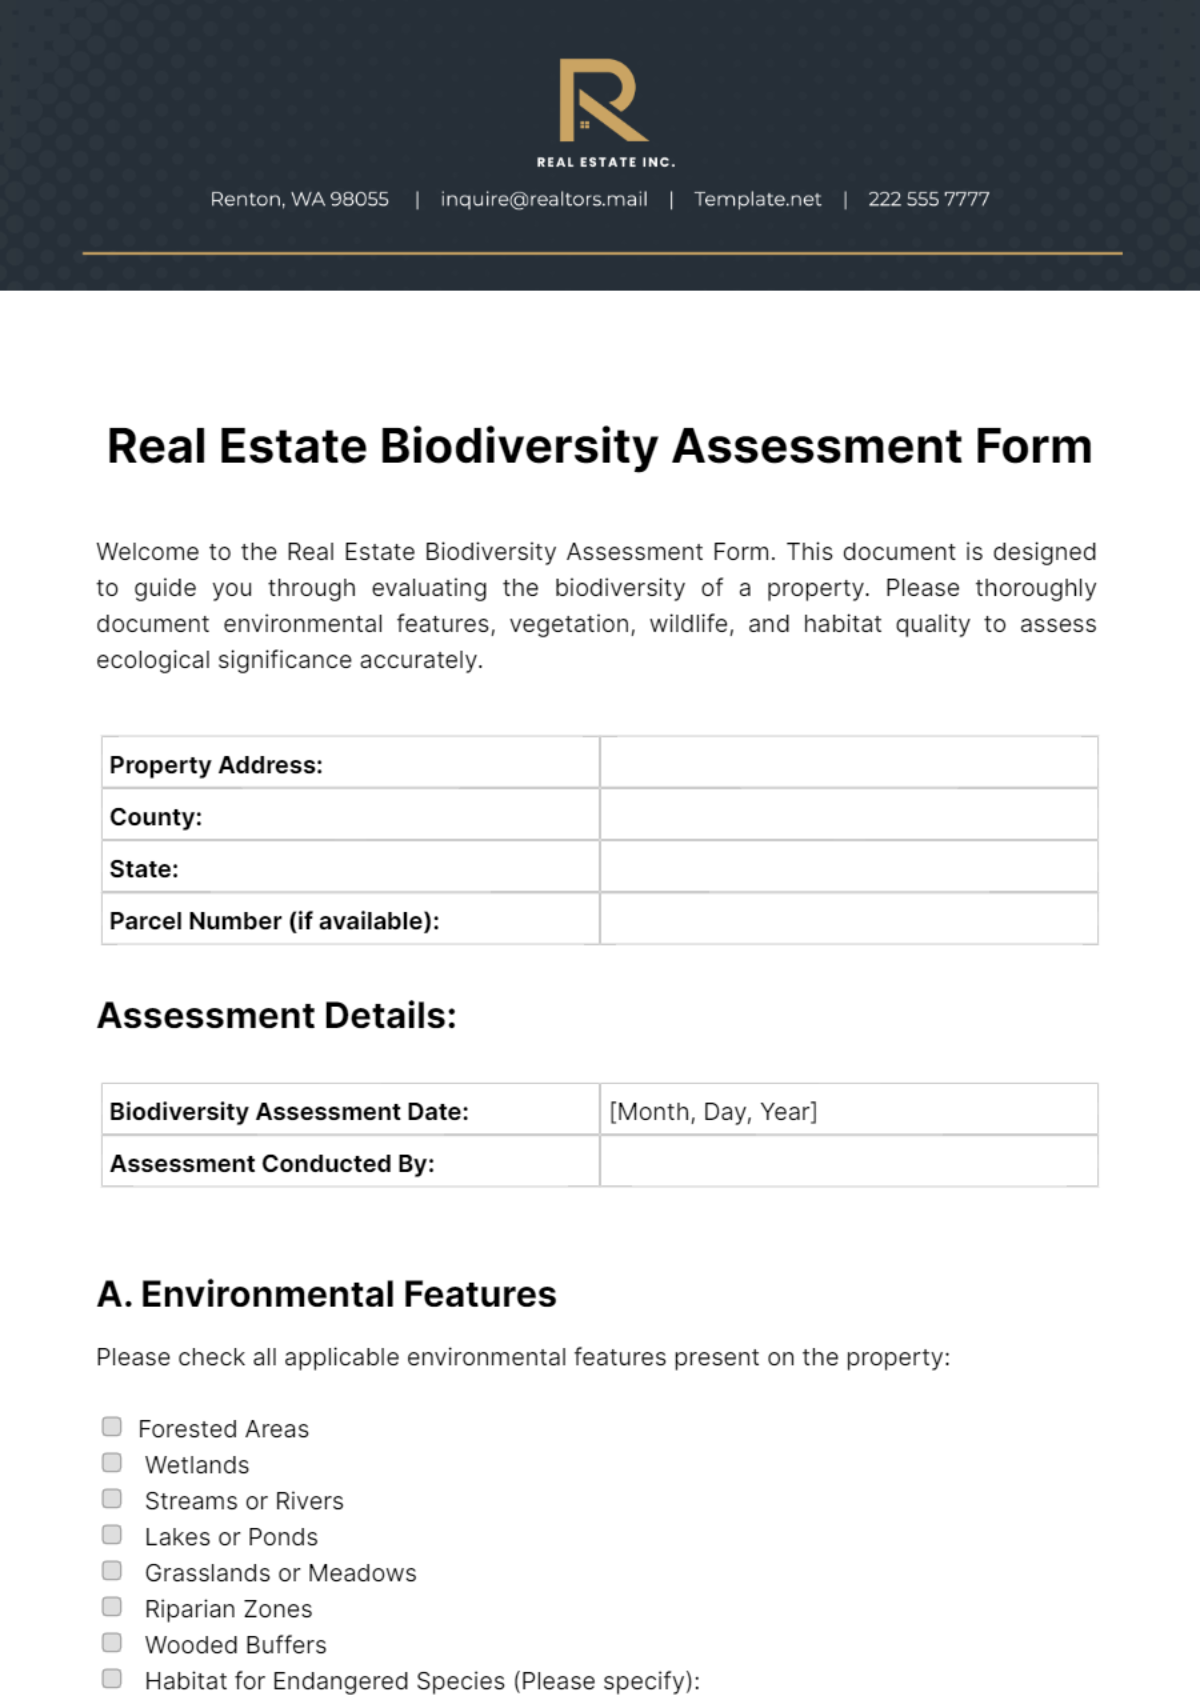 Real Estate Biodiversity Assessment Form Template